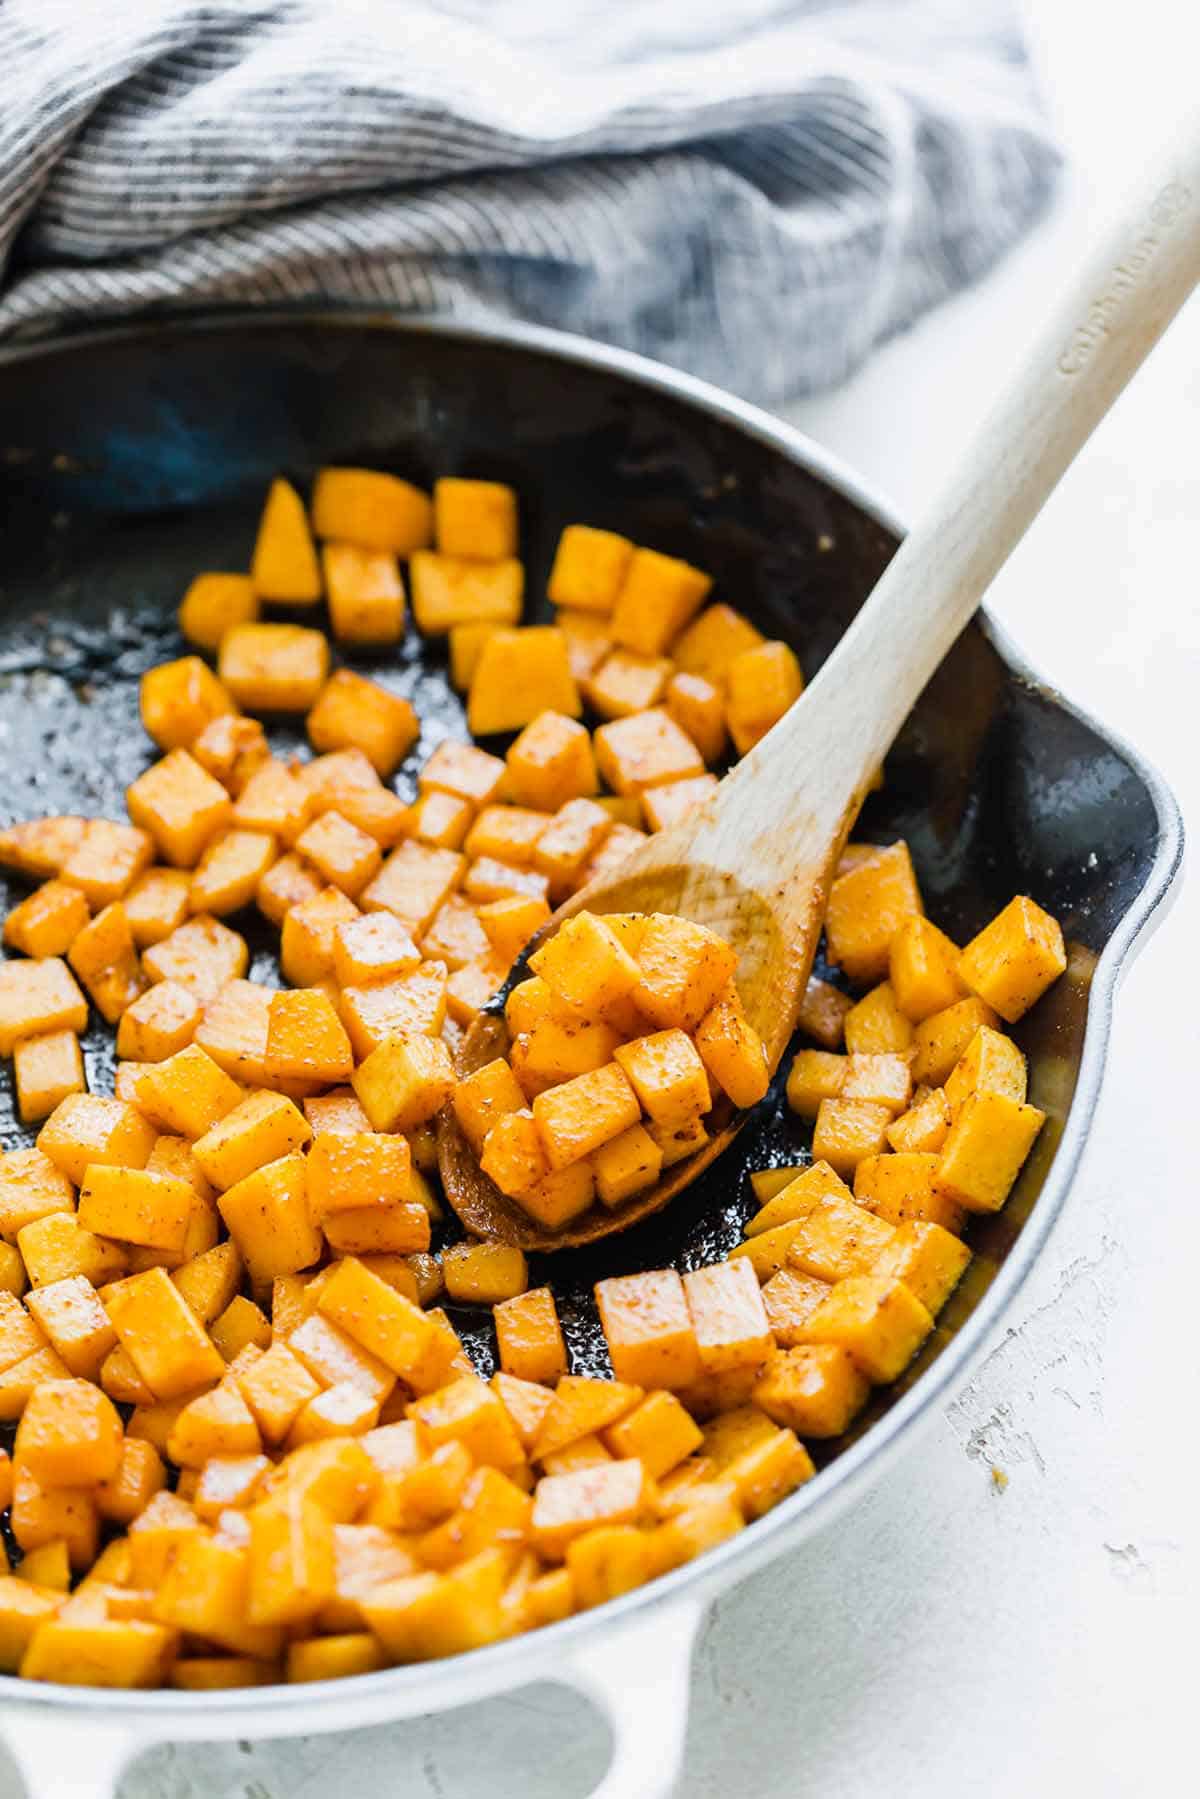 Cubed, cooked butternut squash in a white skillet.